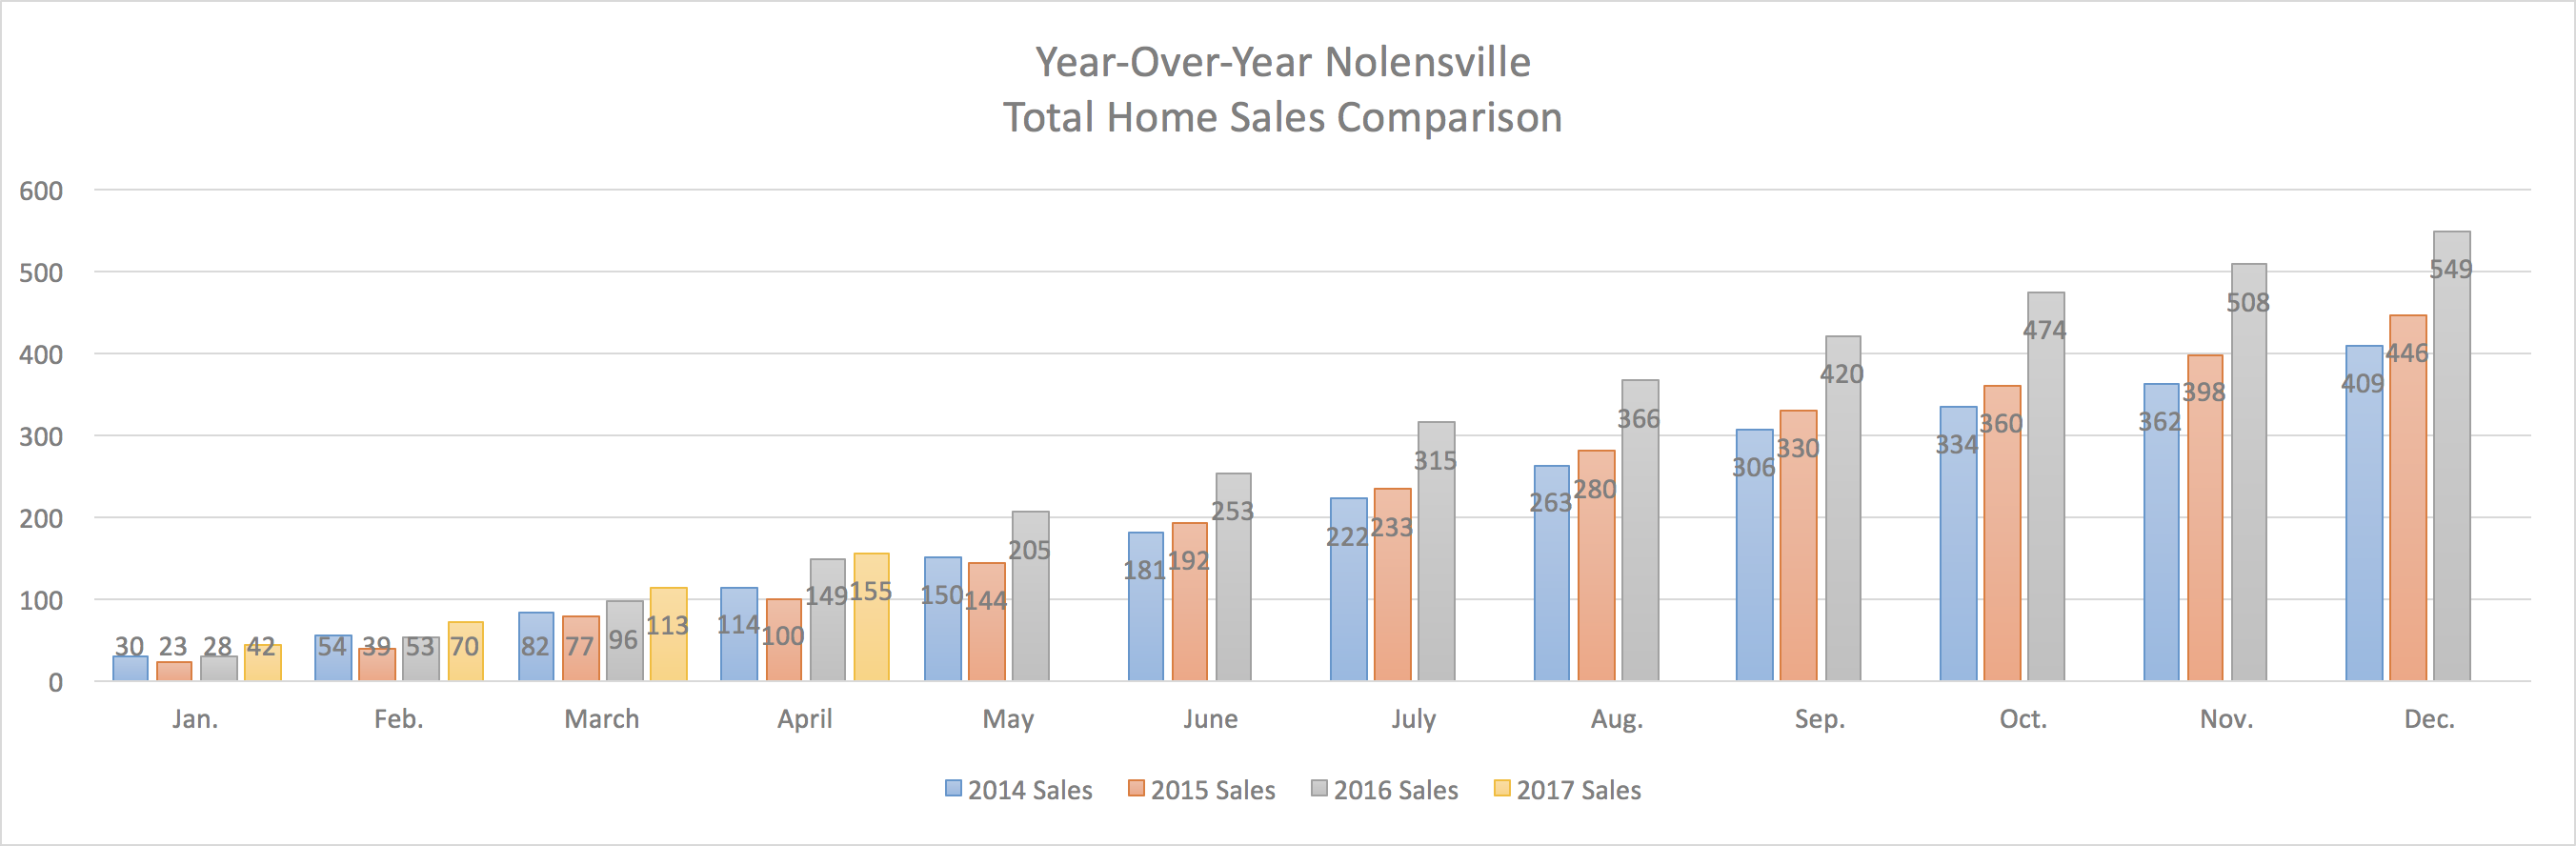 Nolensville Year-Over-Year Home Sales Through April 2017